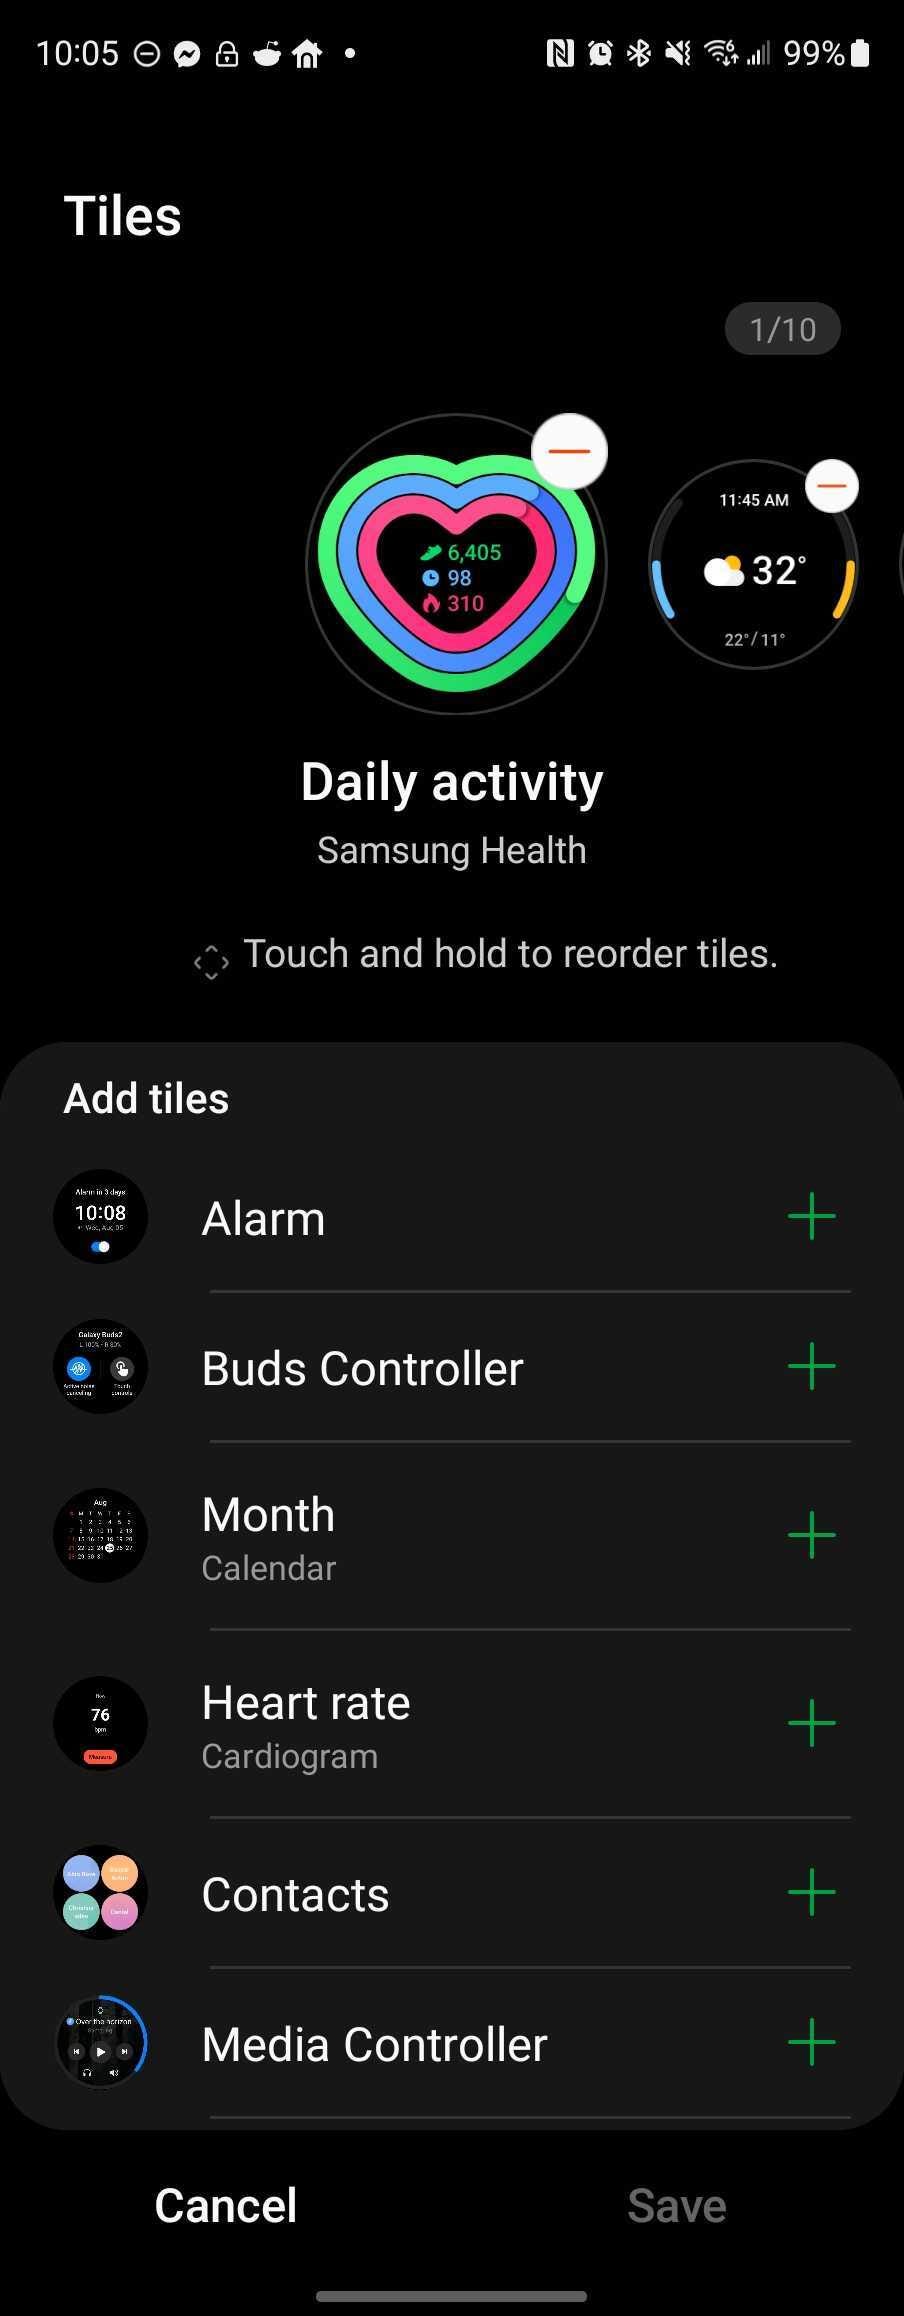 A daily activity log in the Galaxy Watch 4 App